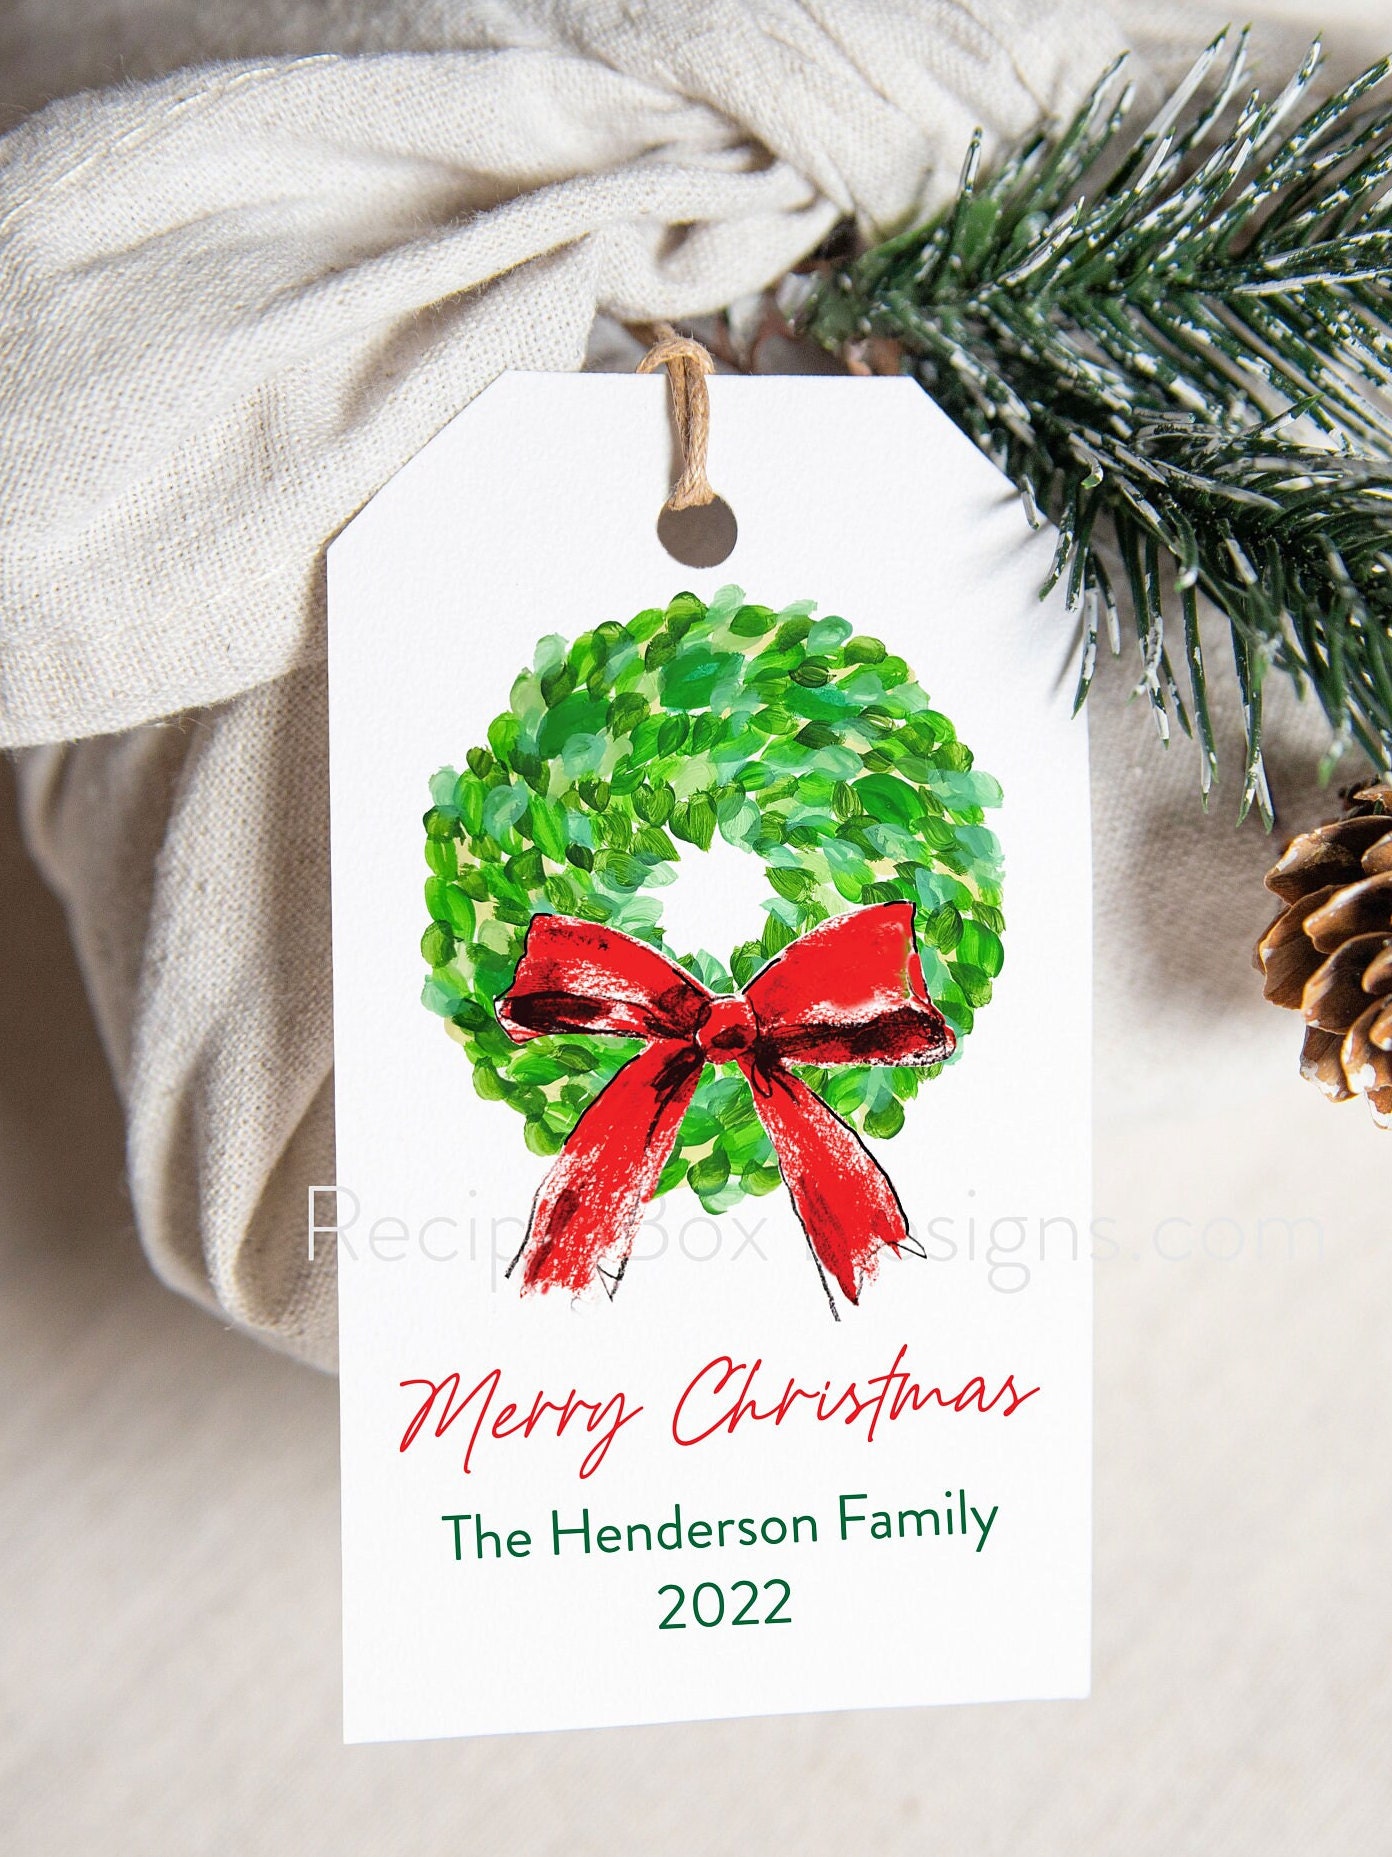 Holiday Gift Tags - TheRoomMom